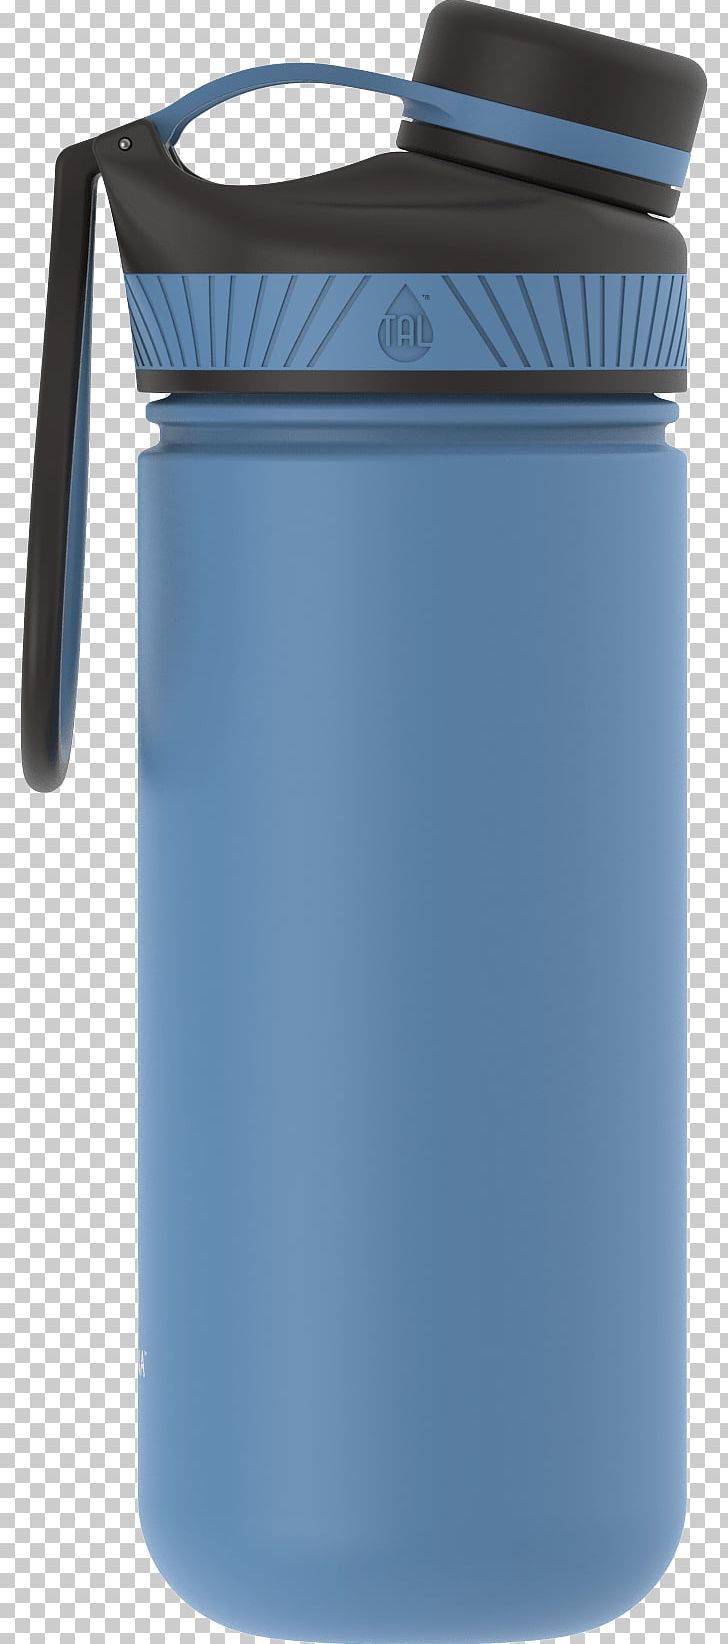 Water Bottles Thermoses Lid Plastic PNG, Clipart, Bottle, Cobalt Blue, Container, Cylinder, Drinkware Free PNG Download